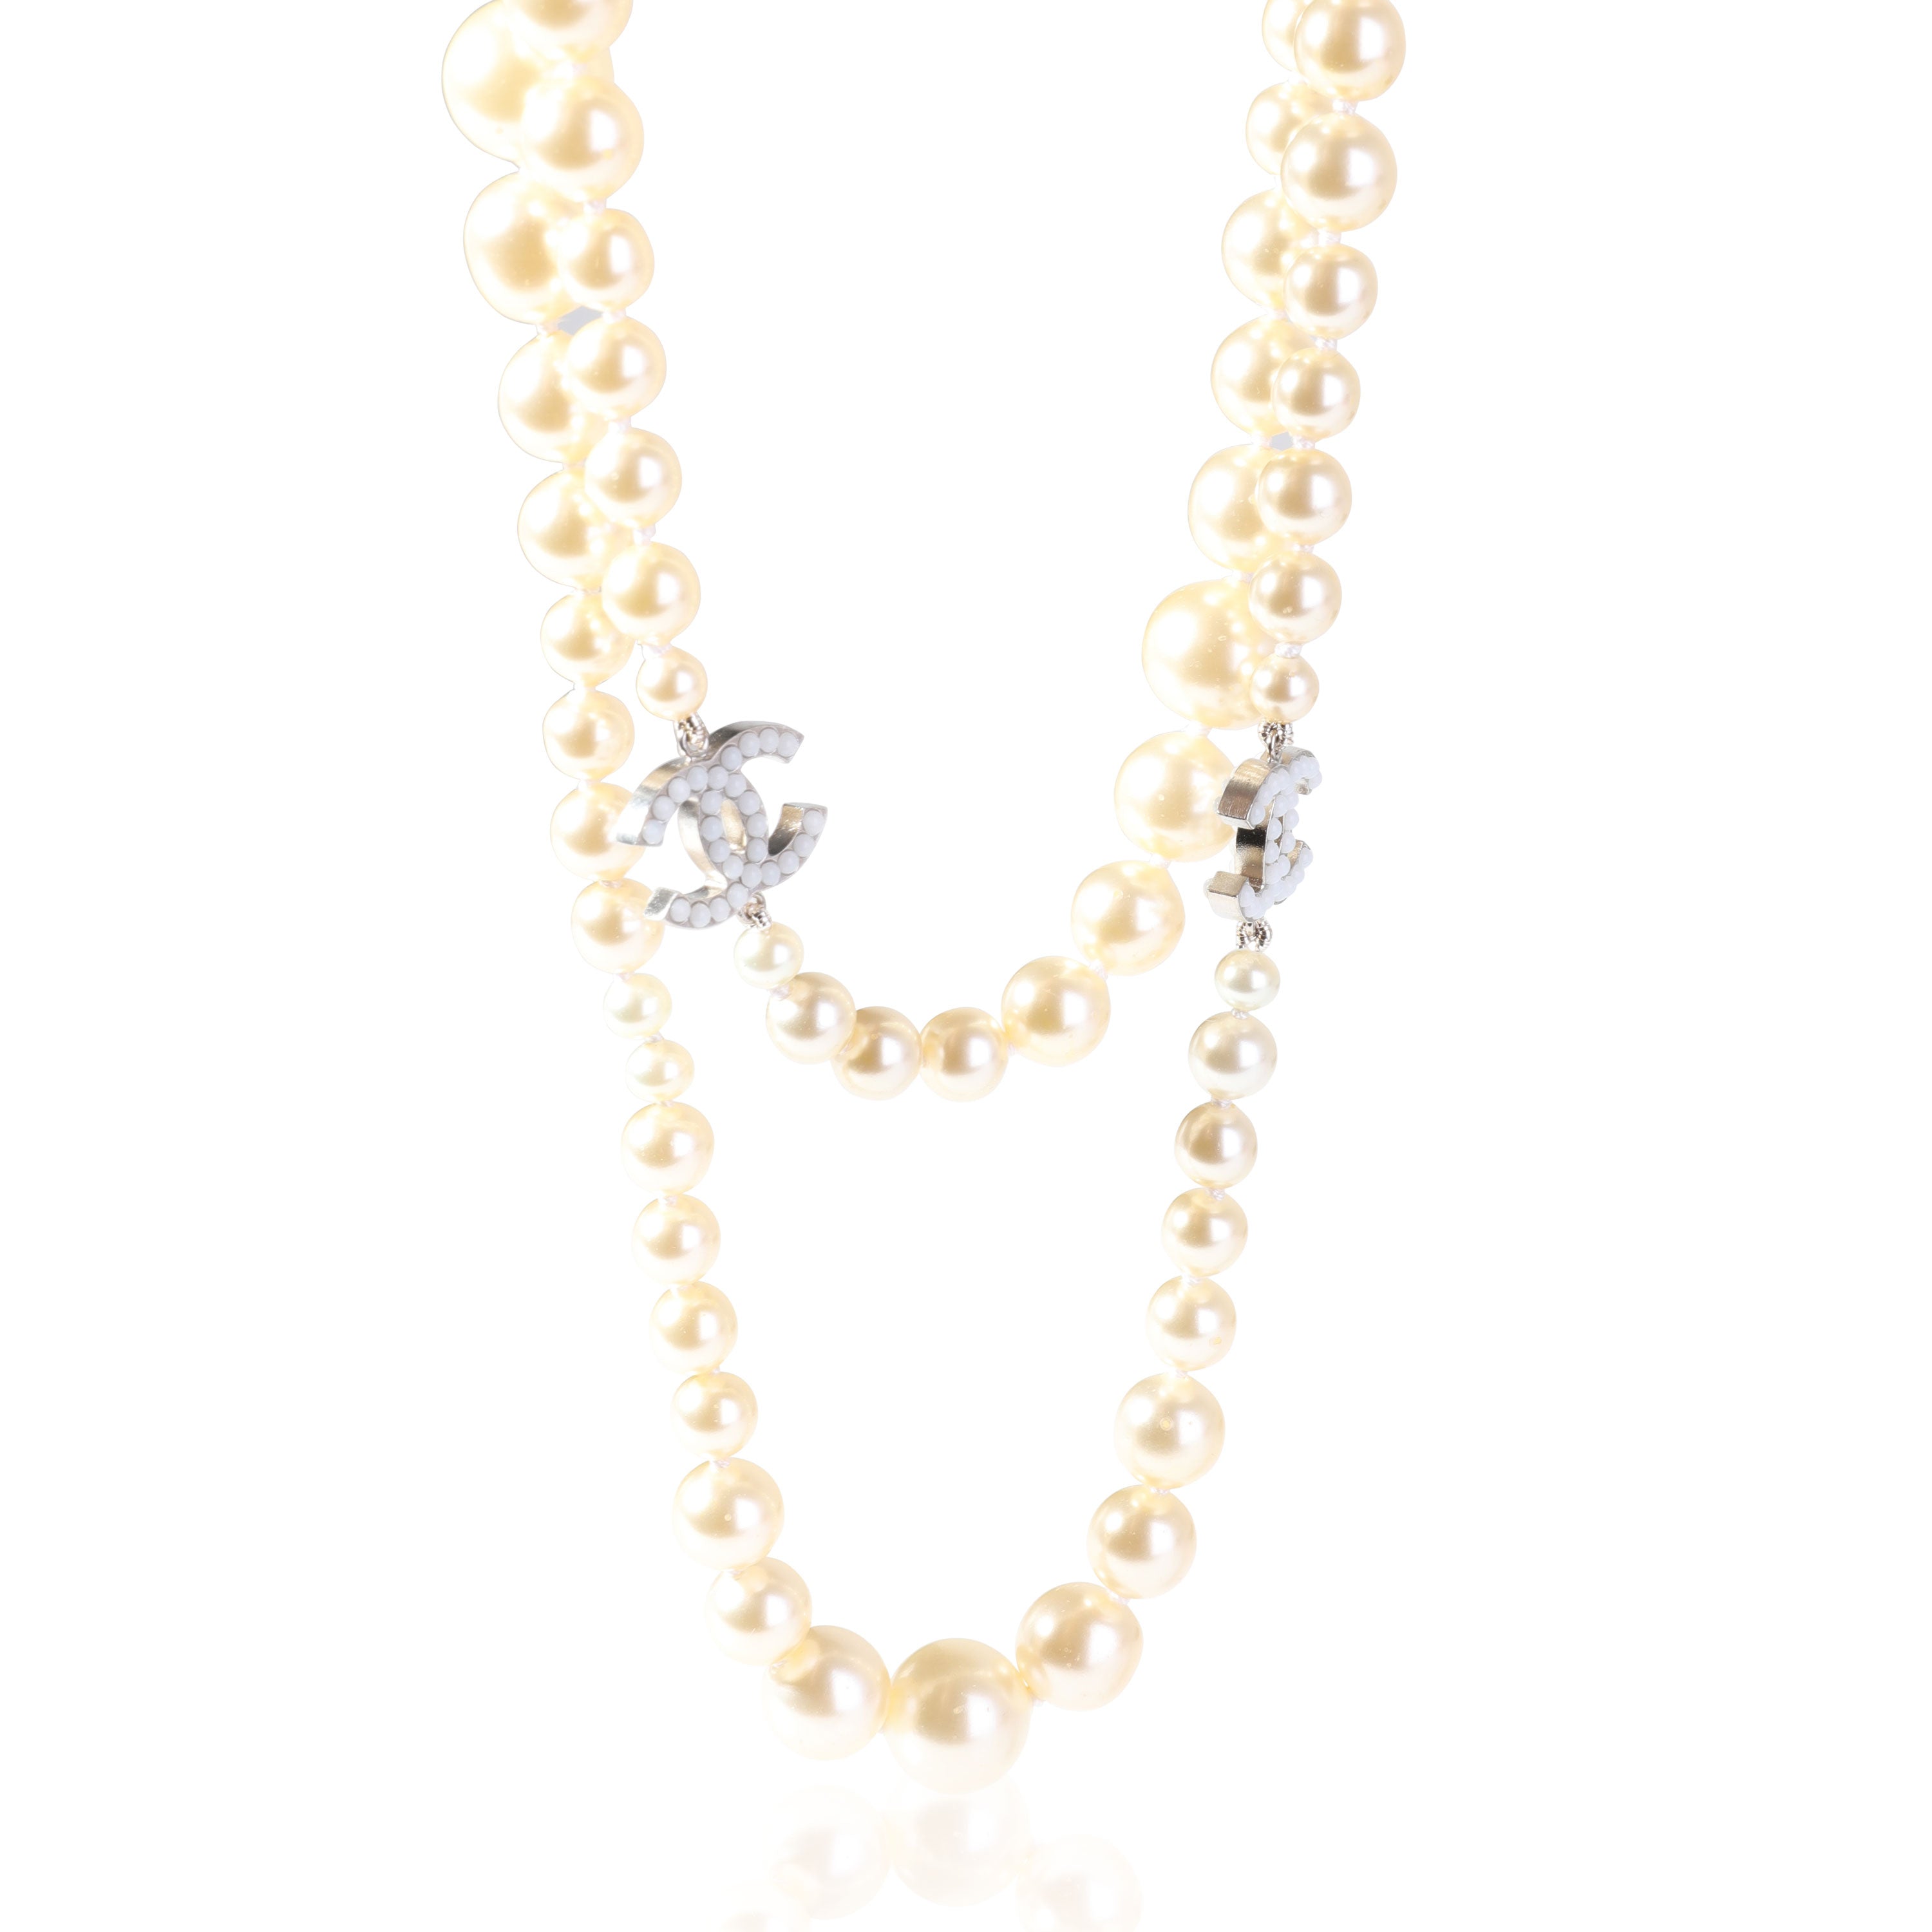 Chanel Faux Pearl Continuous 2008 Collection by Karl Lagerfeld Necklace, myGemma, IT